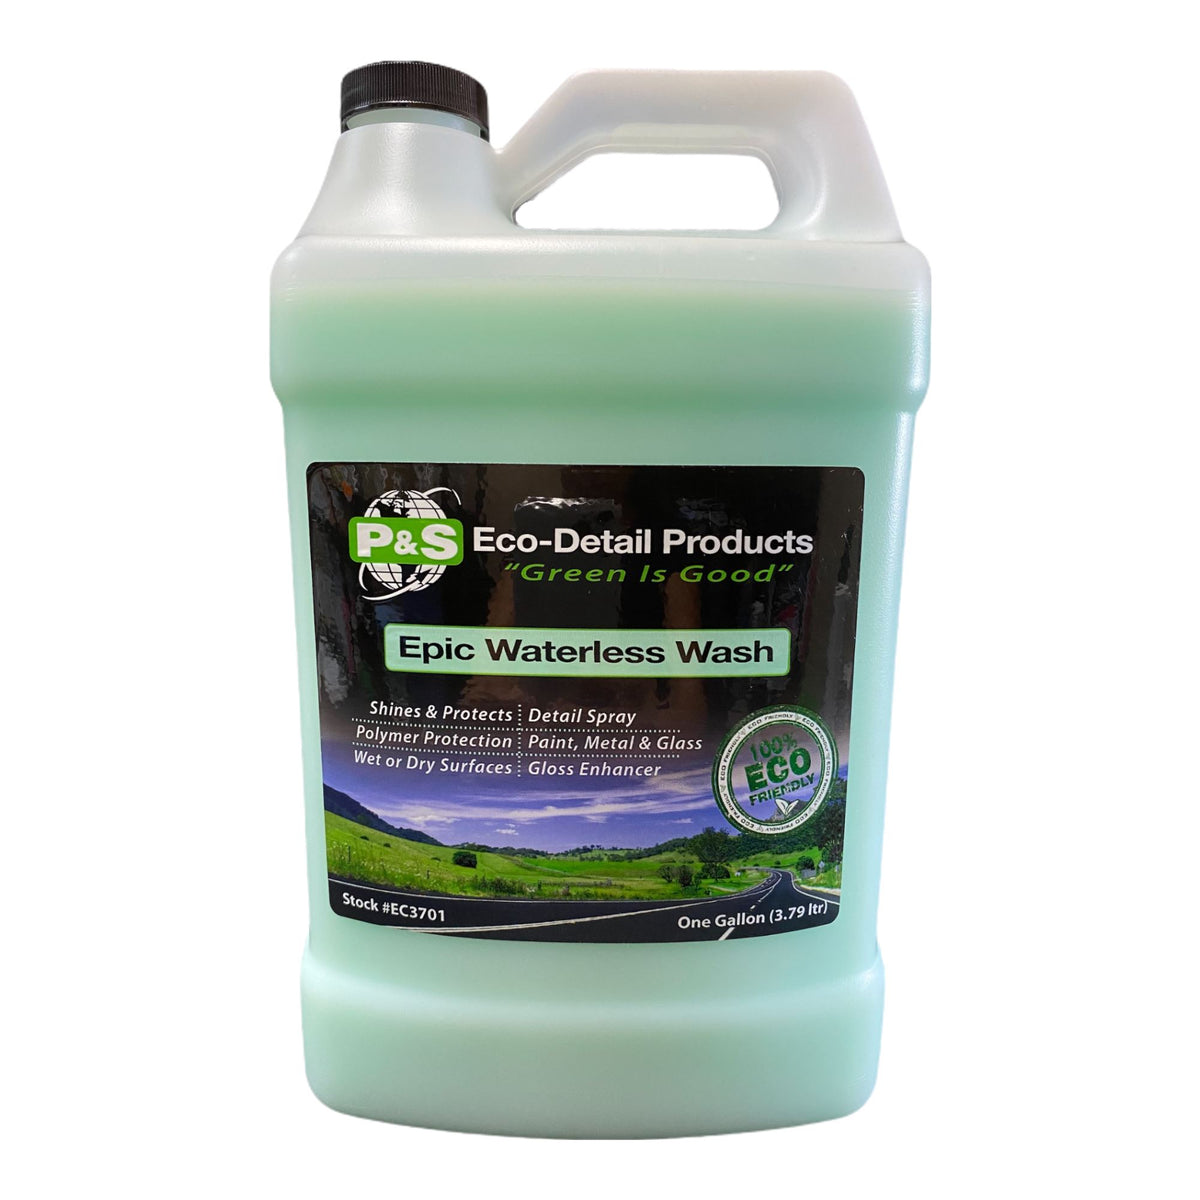 P&S ABSOLUTE Rinseless Wash - 1 gal.